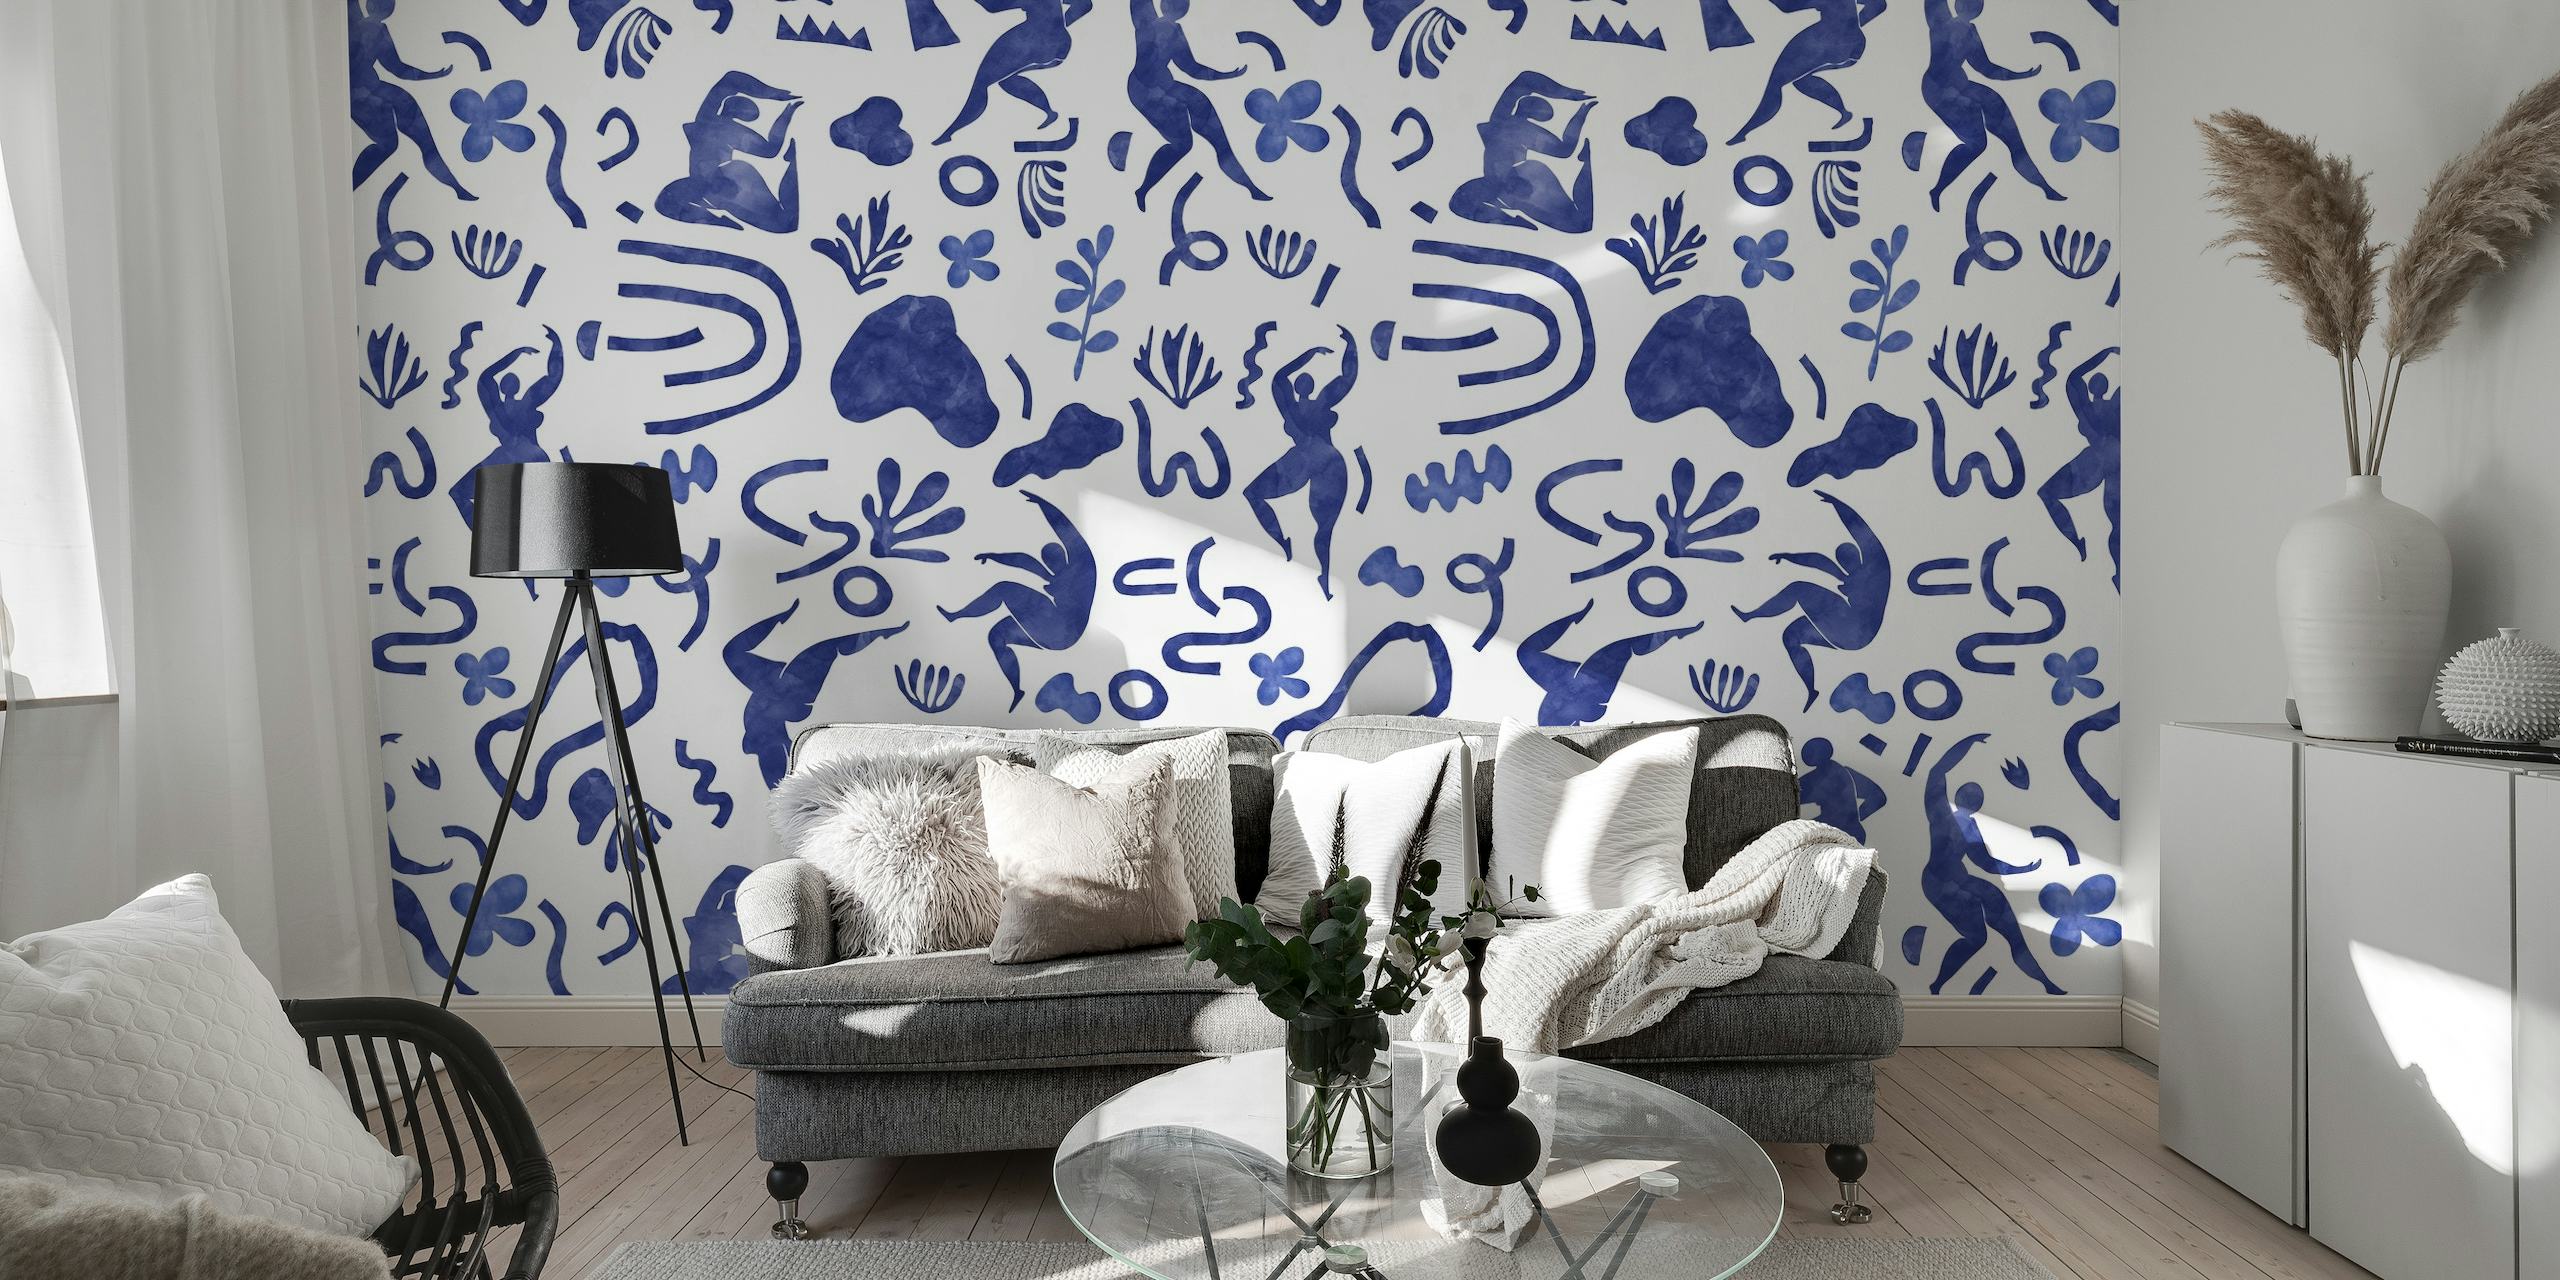 Abstract women and nature pattern wall mural in indigo blue